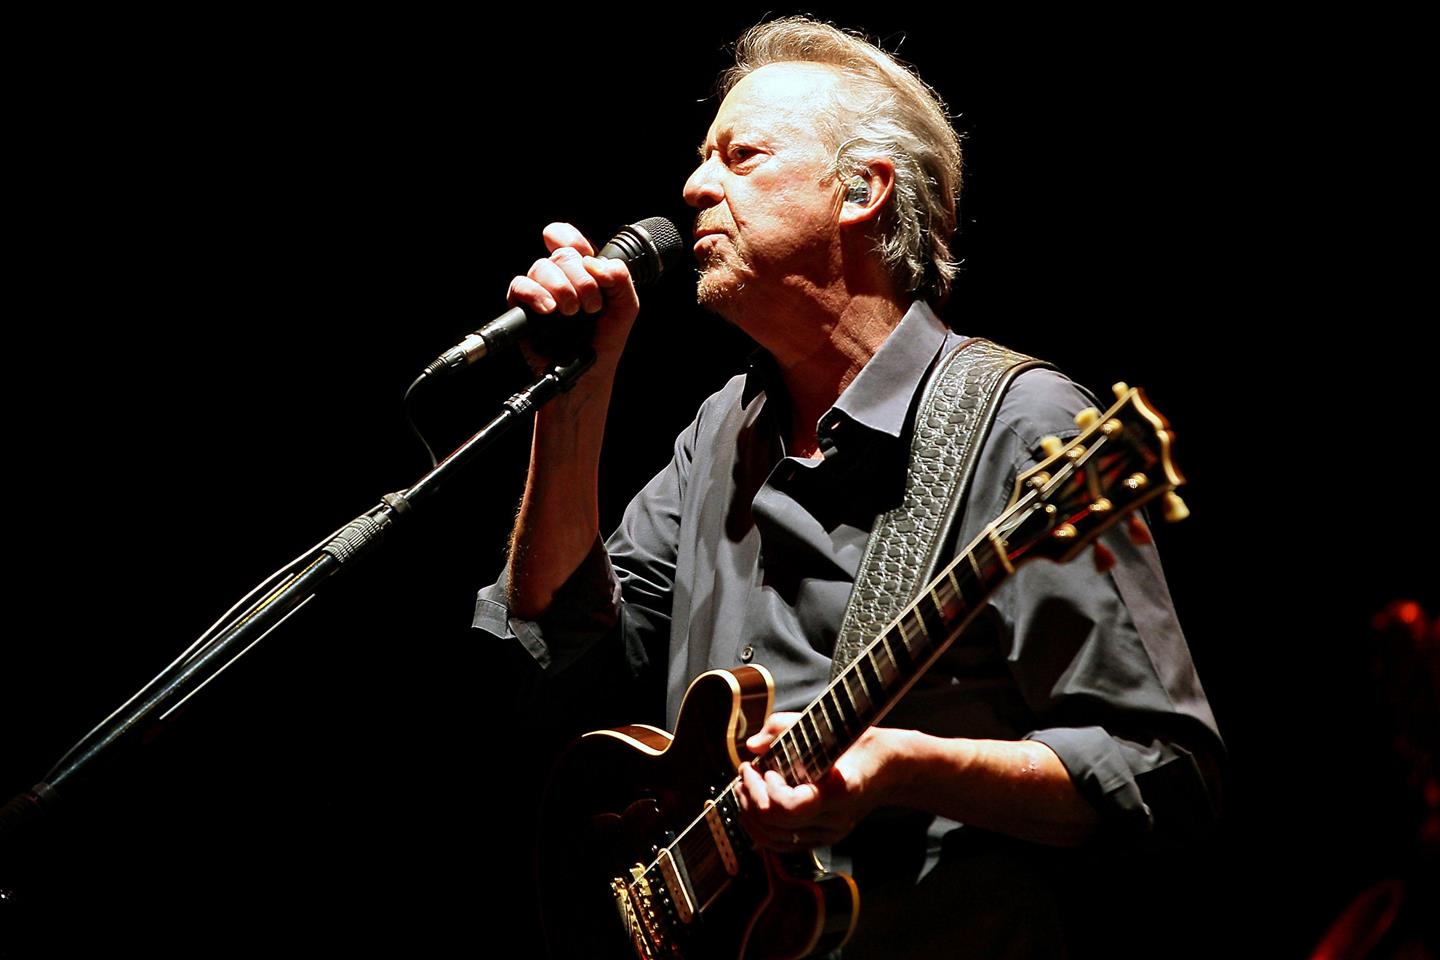 Boz Scaggs Tickets Boz Scaggs Tour Dates 2021 and Concert Tickets